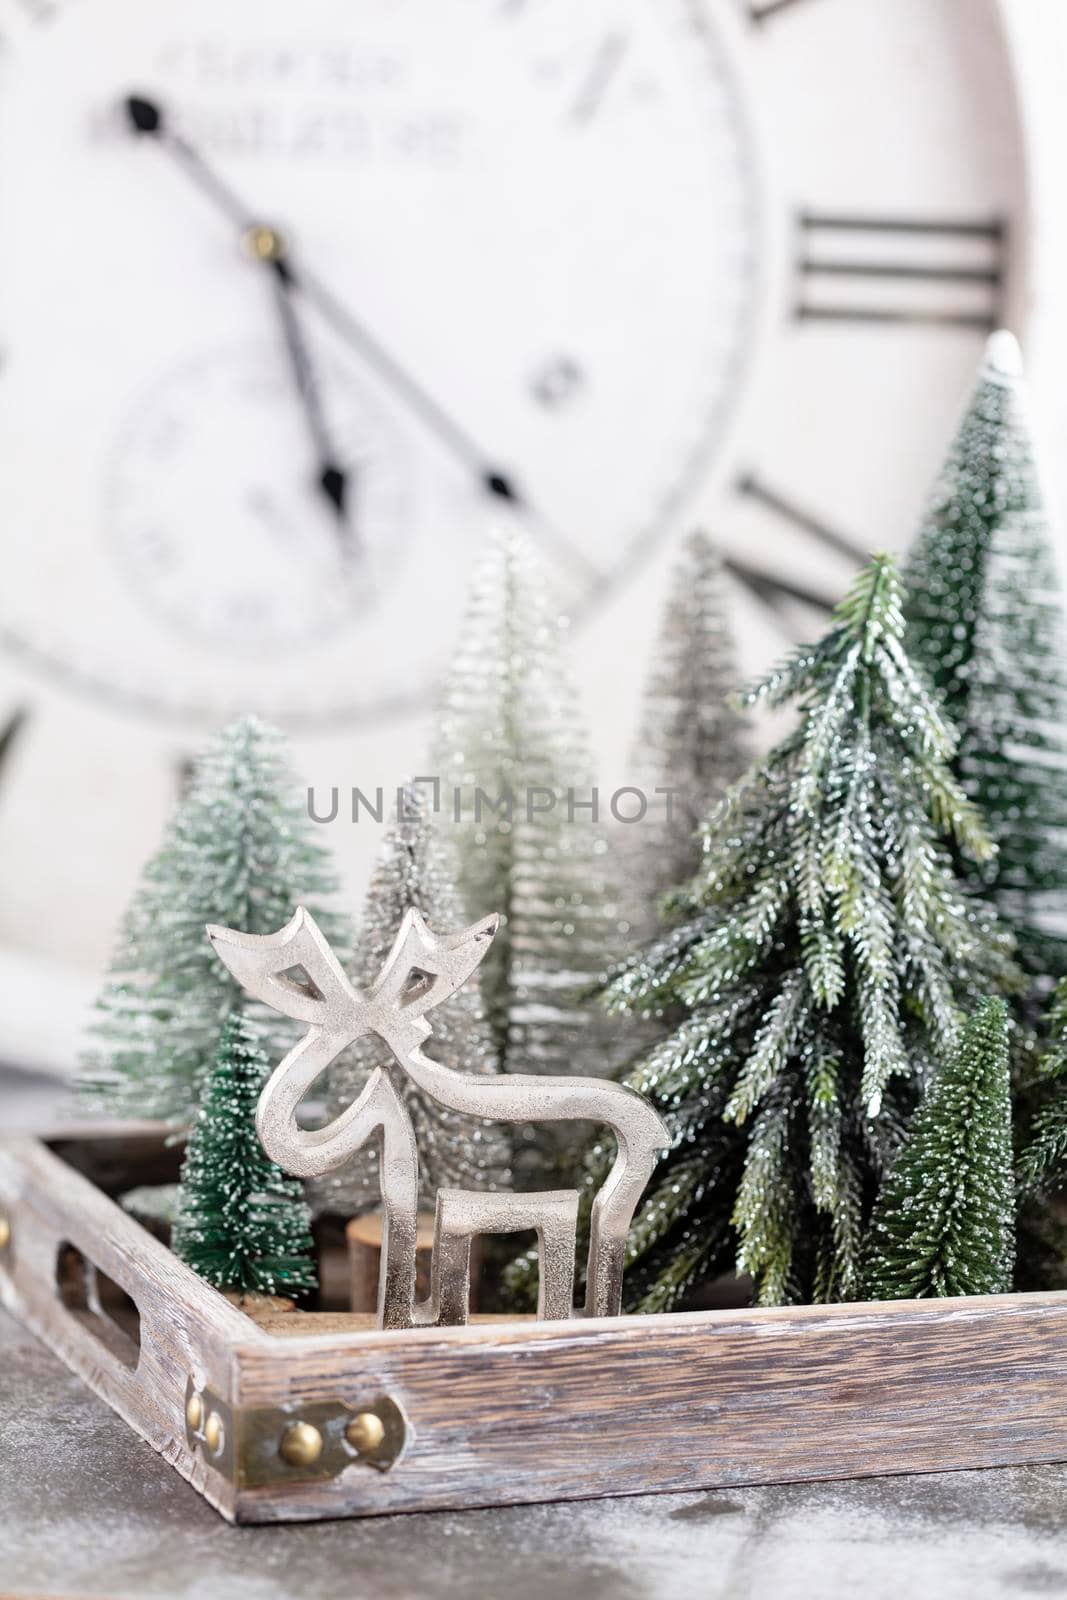 Christmas clock with winter decoration. Happy new year concept by gitusik